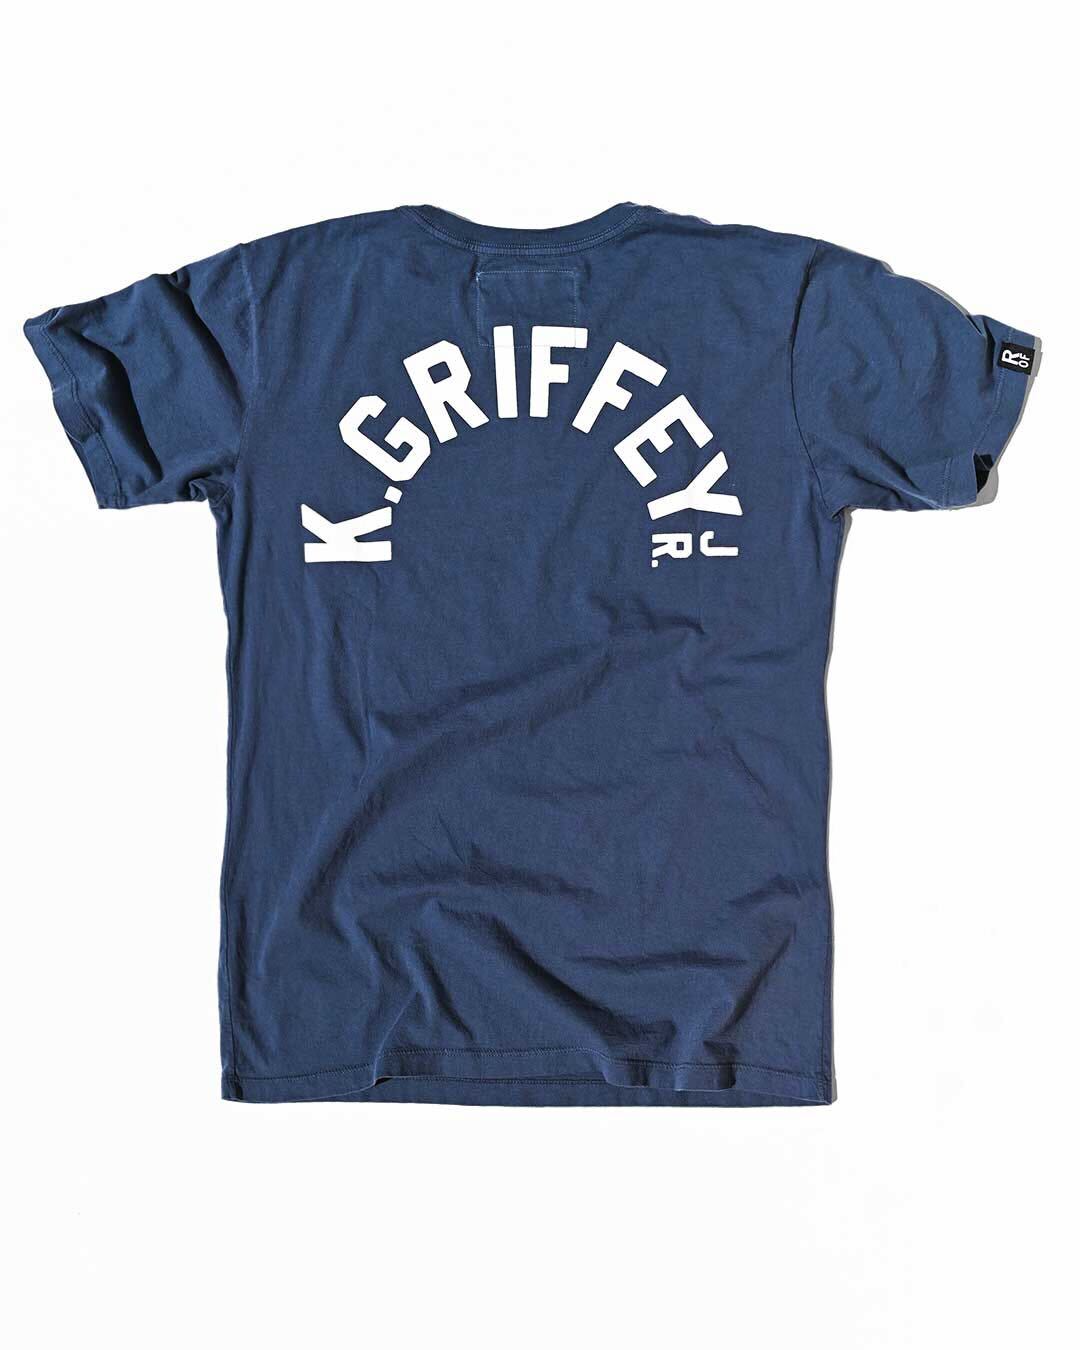 Griffey 1995 Refuse to Lose Navy Tee - Roots of Fight